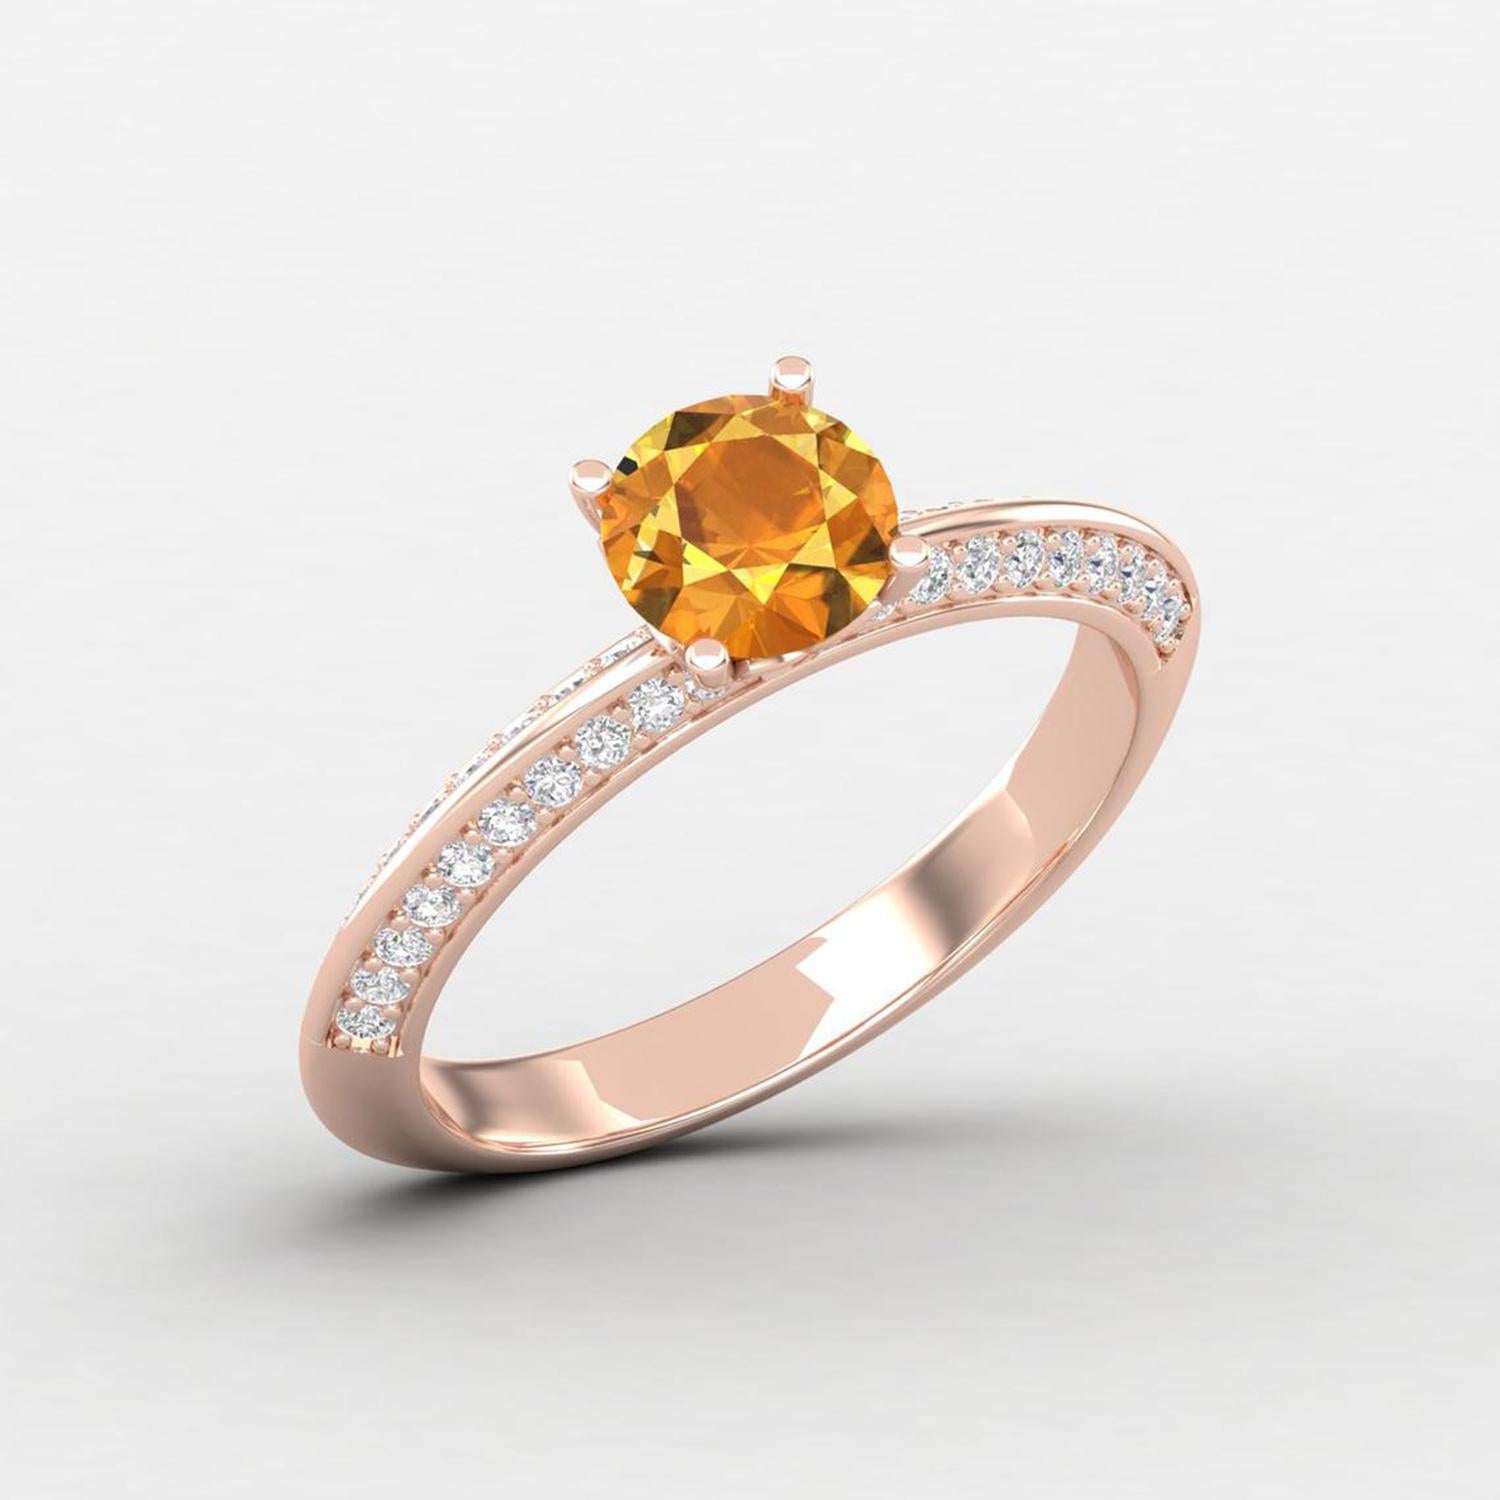 Modern 14 K Gold Yellow Citrine Ring / Diamond Solitaire Ring / Engagement Ring for Her For Sale